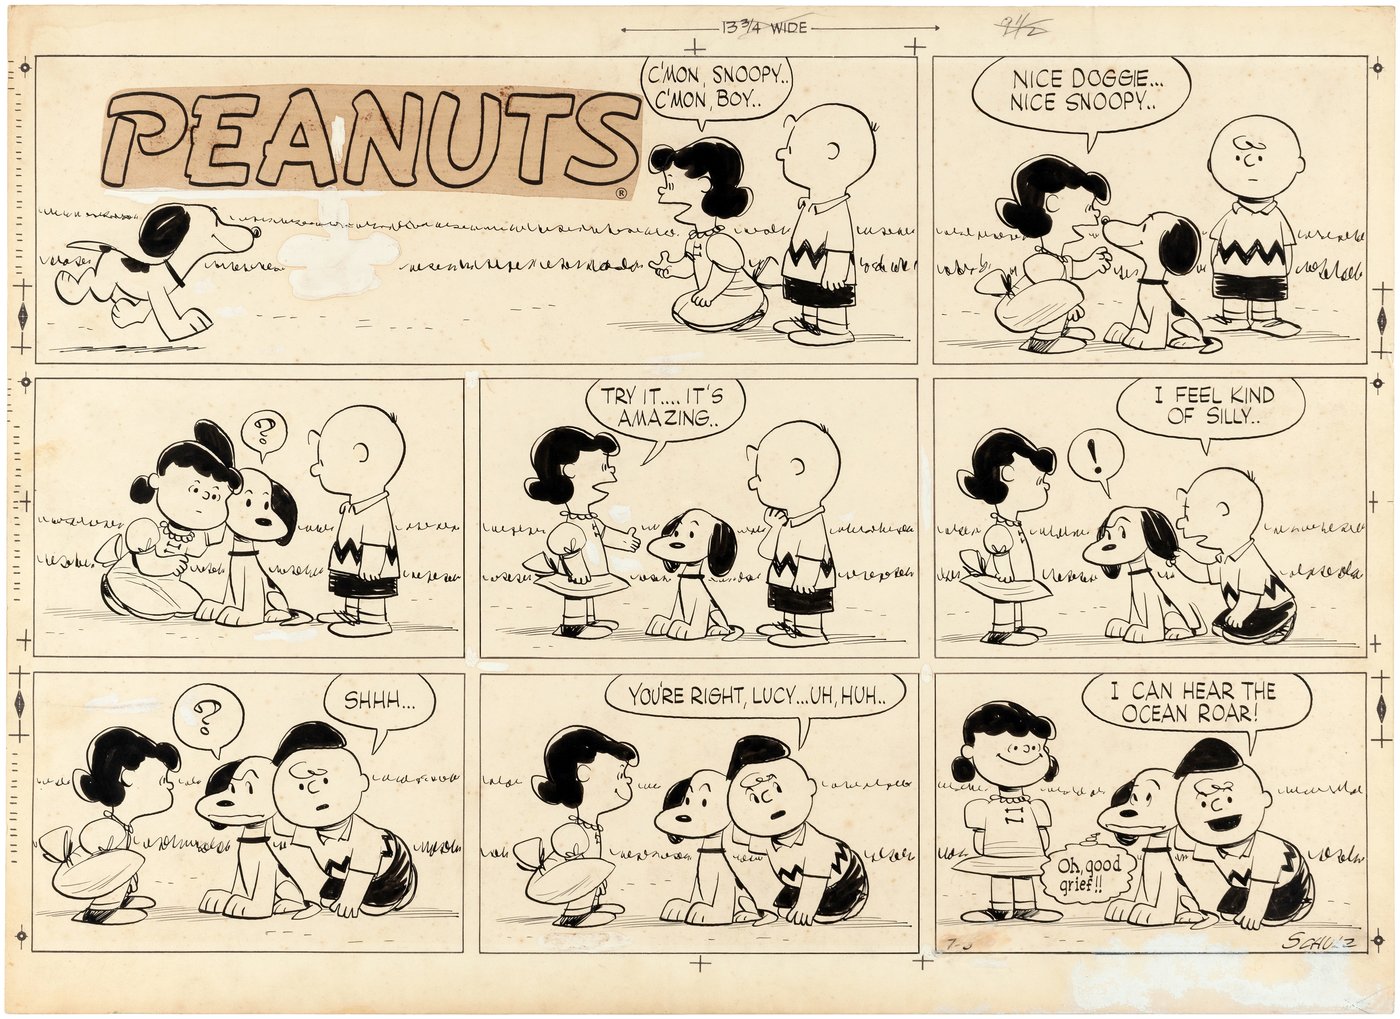 Hake's PEANUTS JULY 3, 1955 SUNDAY PAGE ORIGINAL ART BY CHARLES SCHULZ.